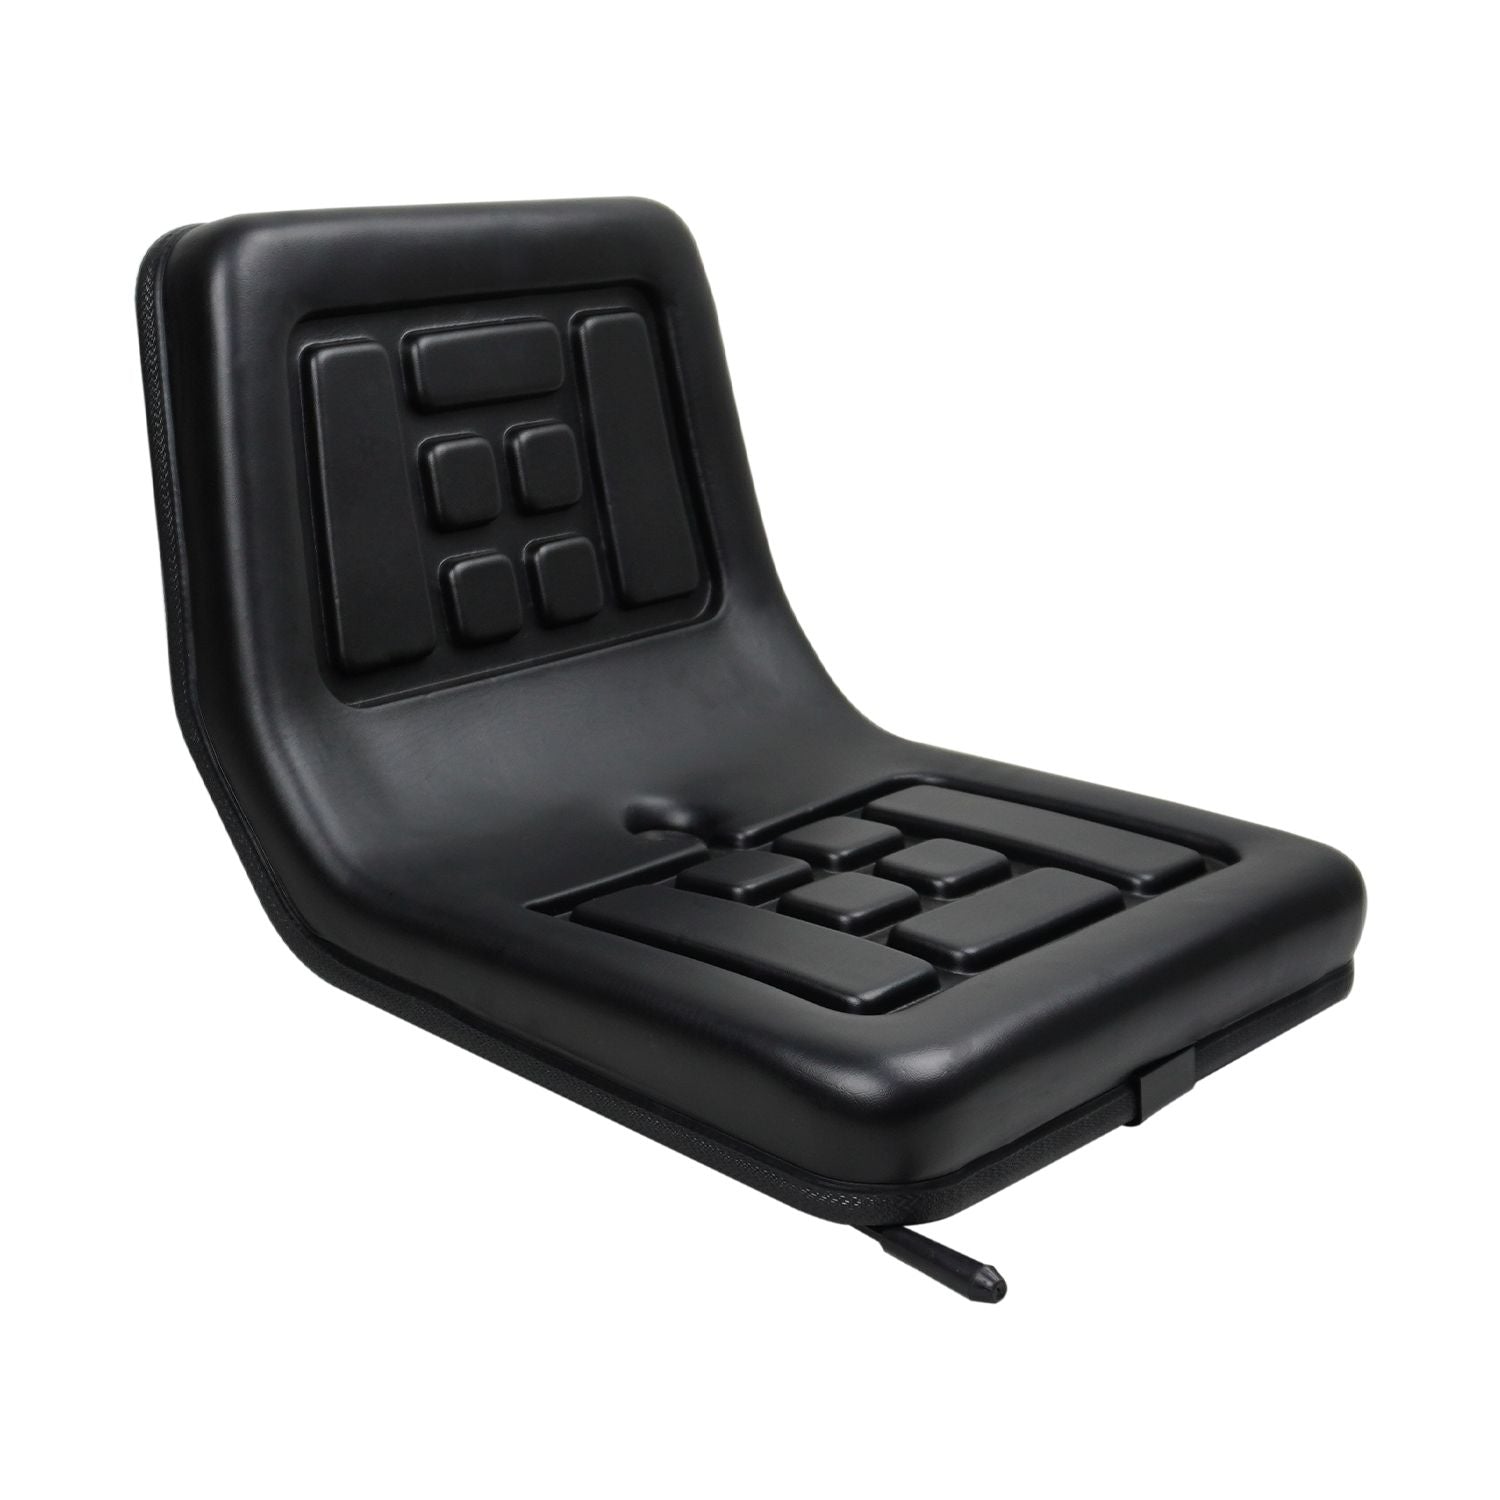 RYNOMATE Universal Tractor Seat with Easy Seat Adjustment (Black)